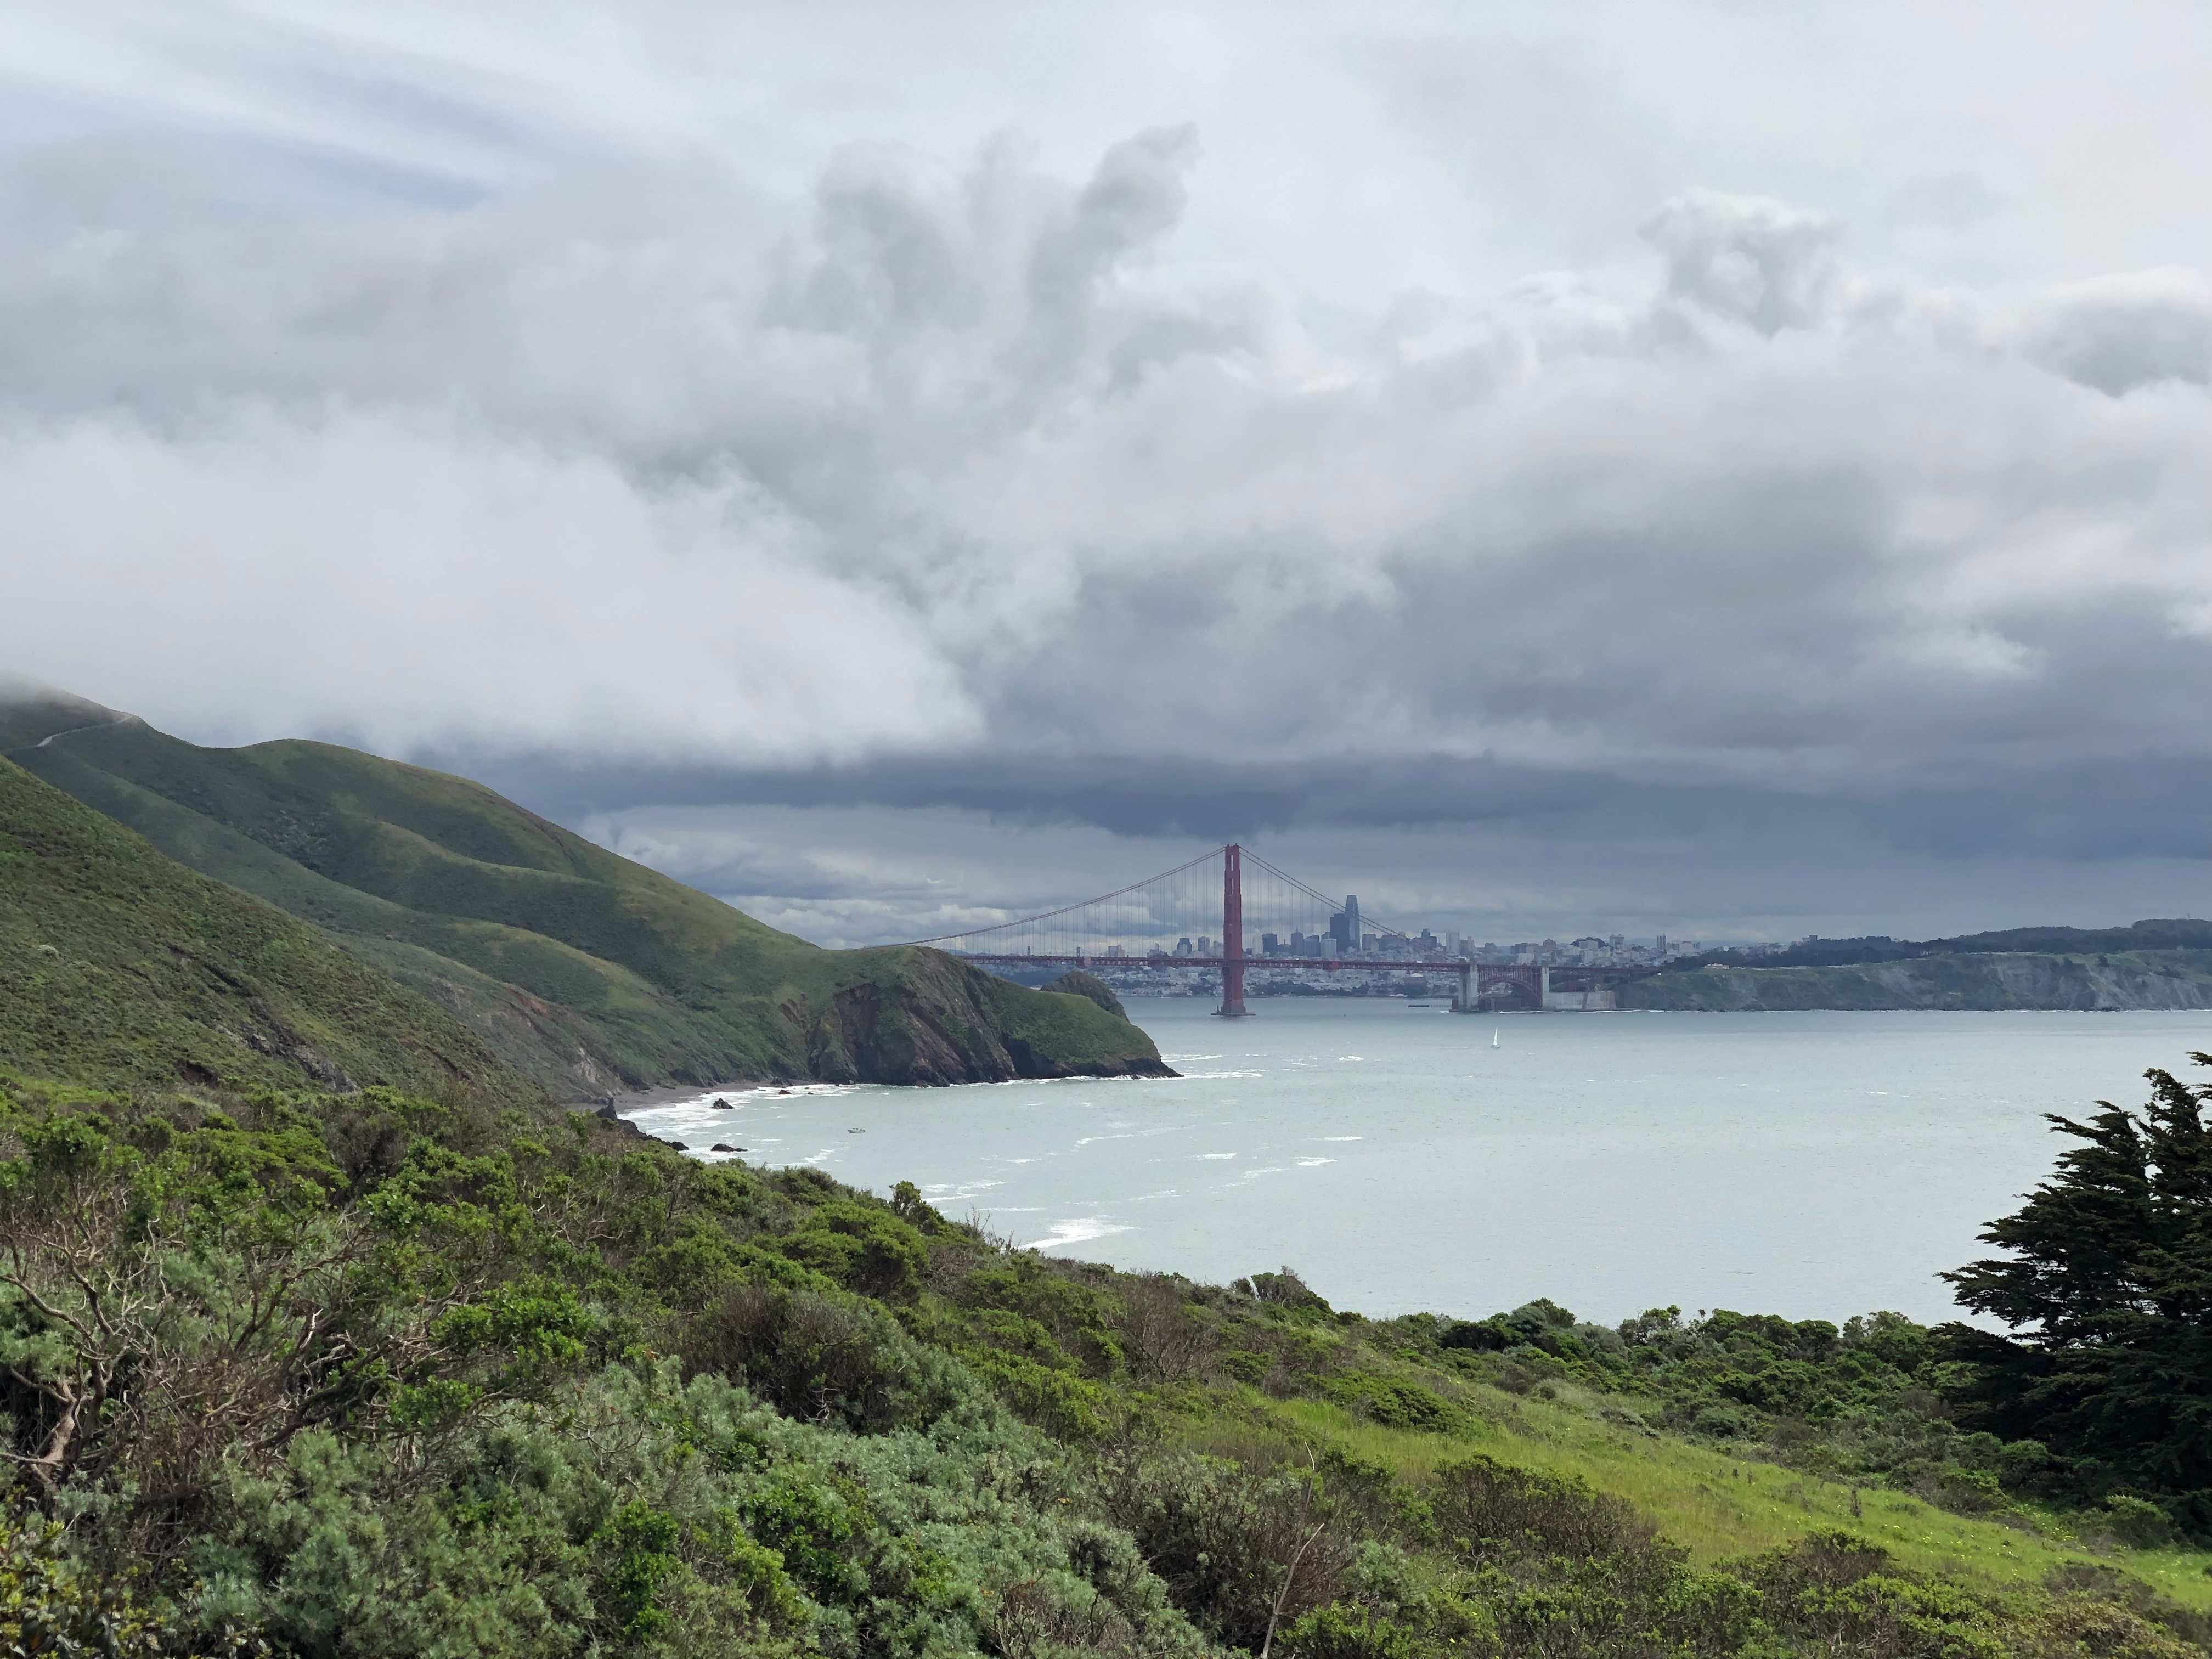 View of the Golden Gate Bridge from the Marin Headlands